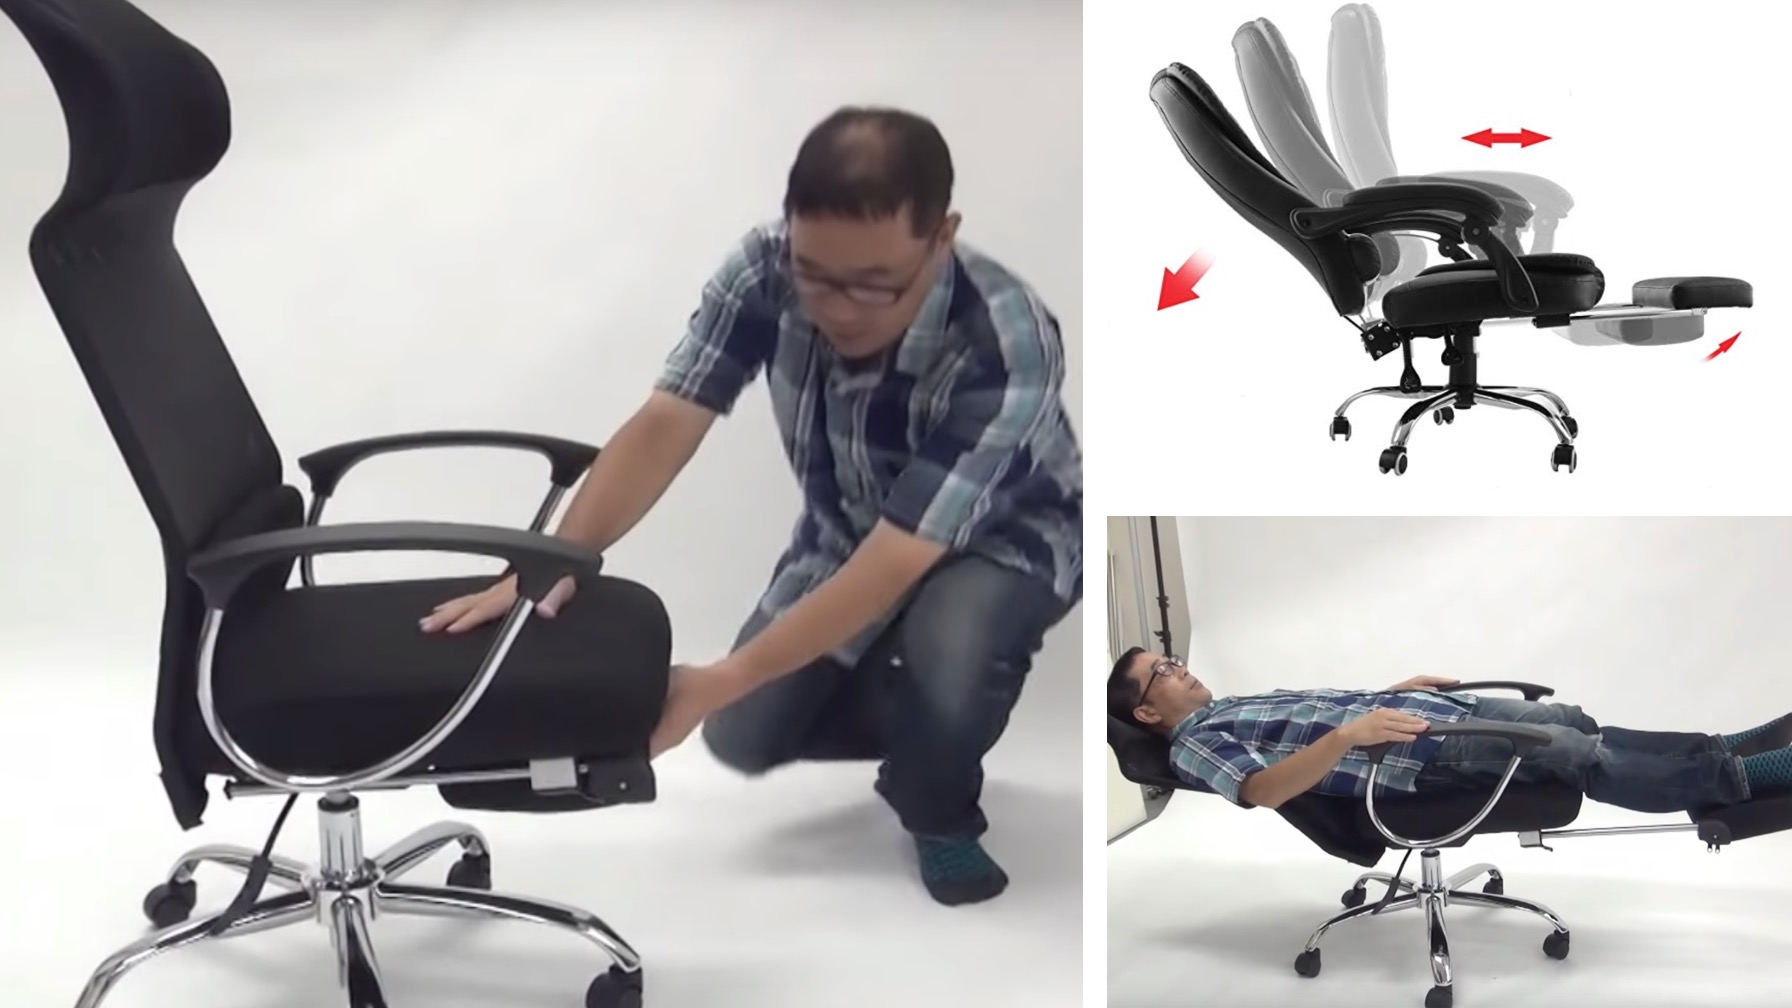 Take a Dad Nap at Work in This New “Lay Flat Office Chair" [WATCH]